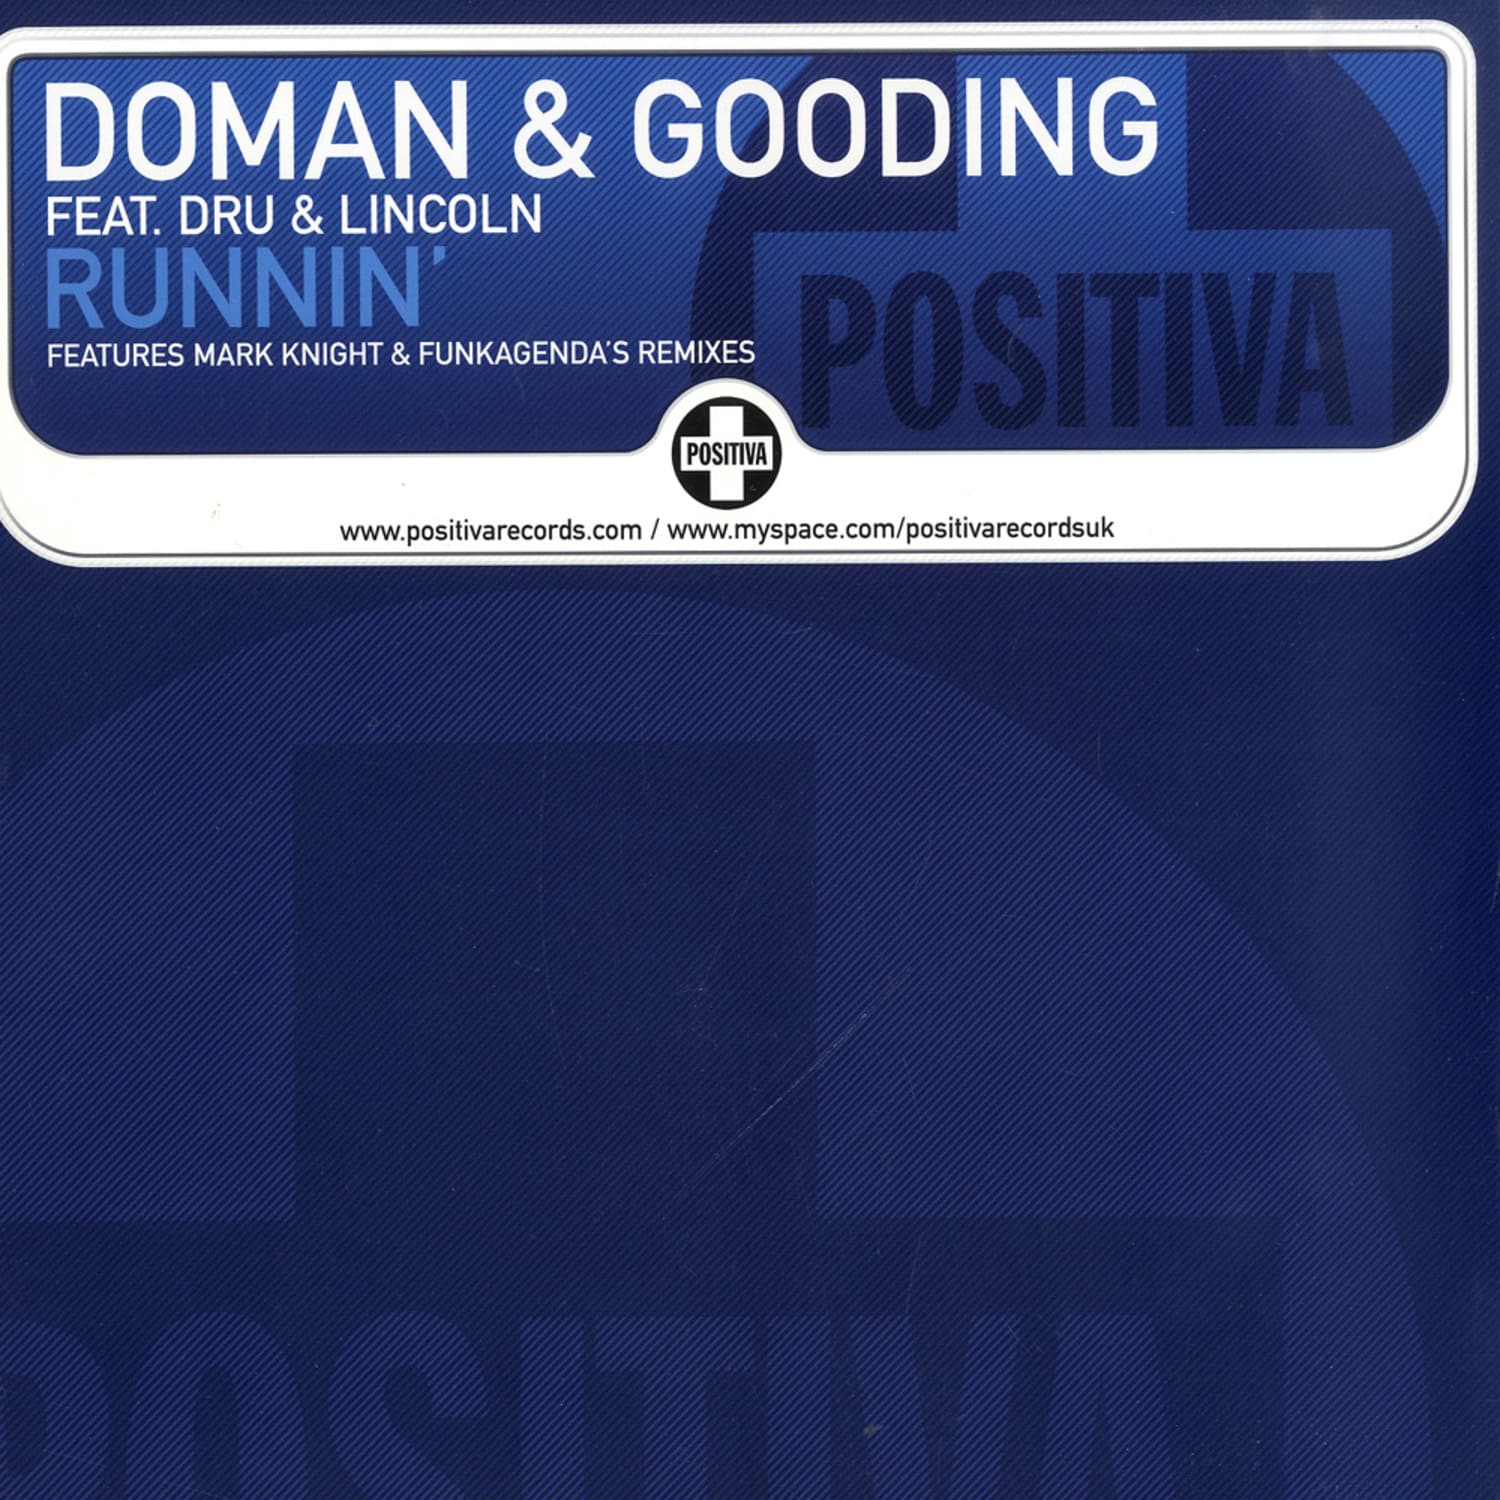 Doman & Gooding feat. Dru & Lincoln - RUNNING PART 2